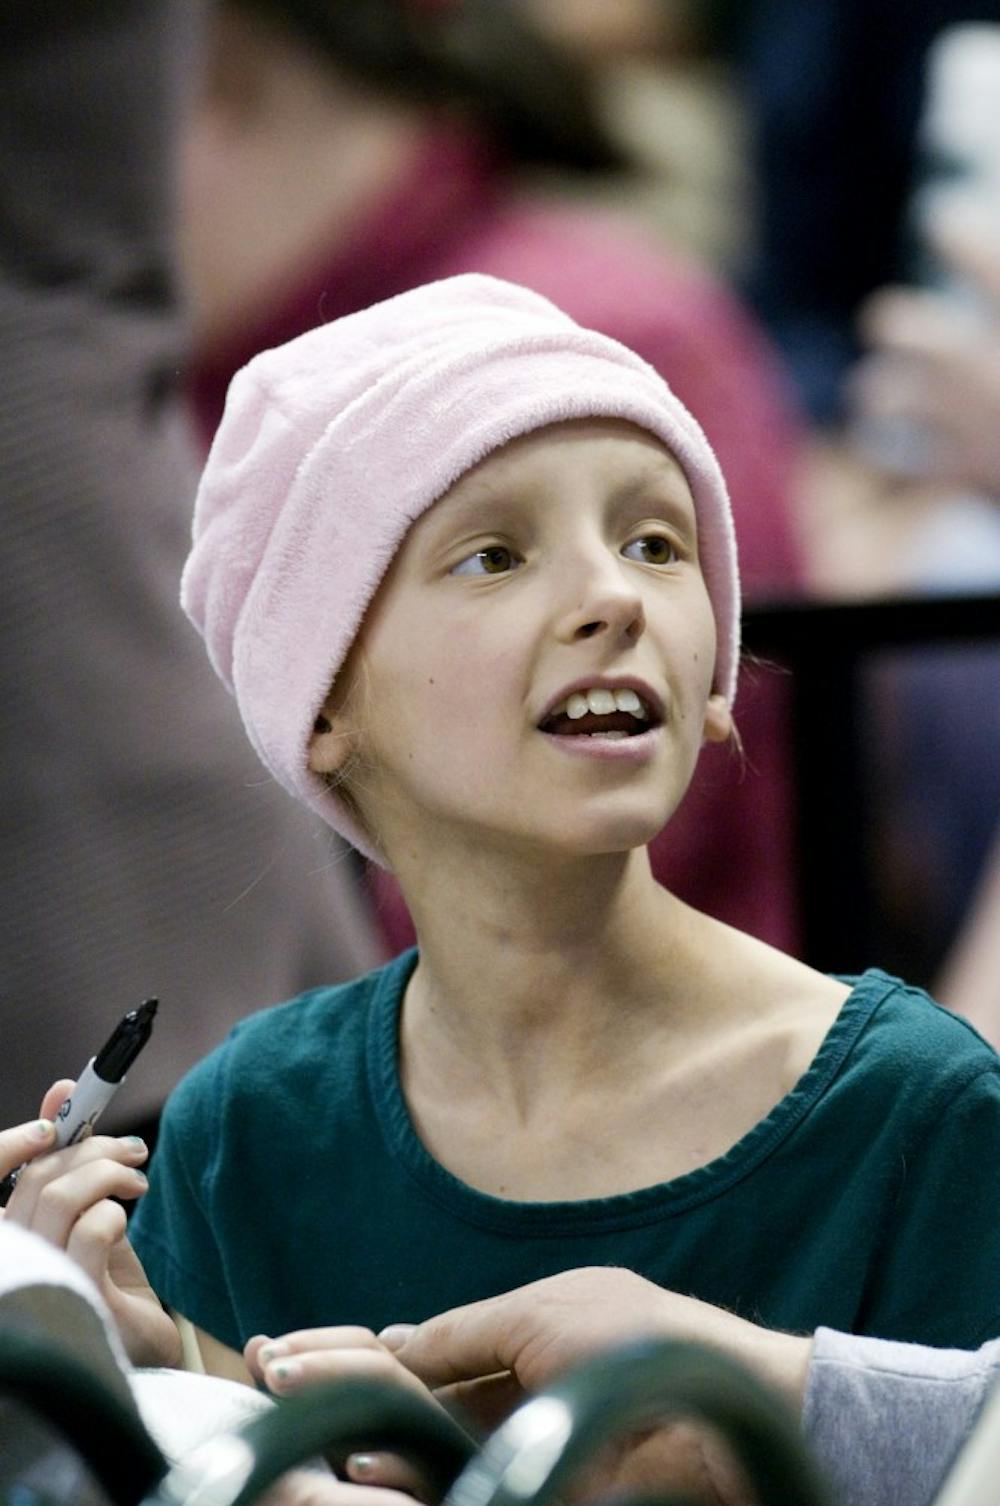 Mariah Mackie, 10, watches the women's basketball game vs. Purdue Sunday night at the Breslin Center. Mackie, a child battling cancer, is this week's kid of inspiration, a program started by the MSU Children's Health Initiative. Derek Berggren/The State News